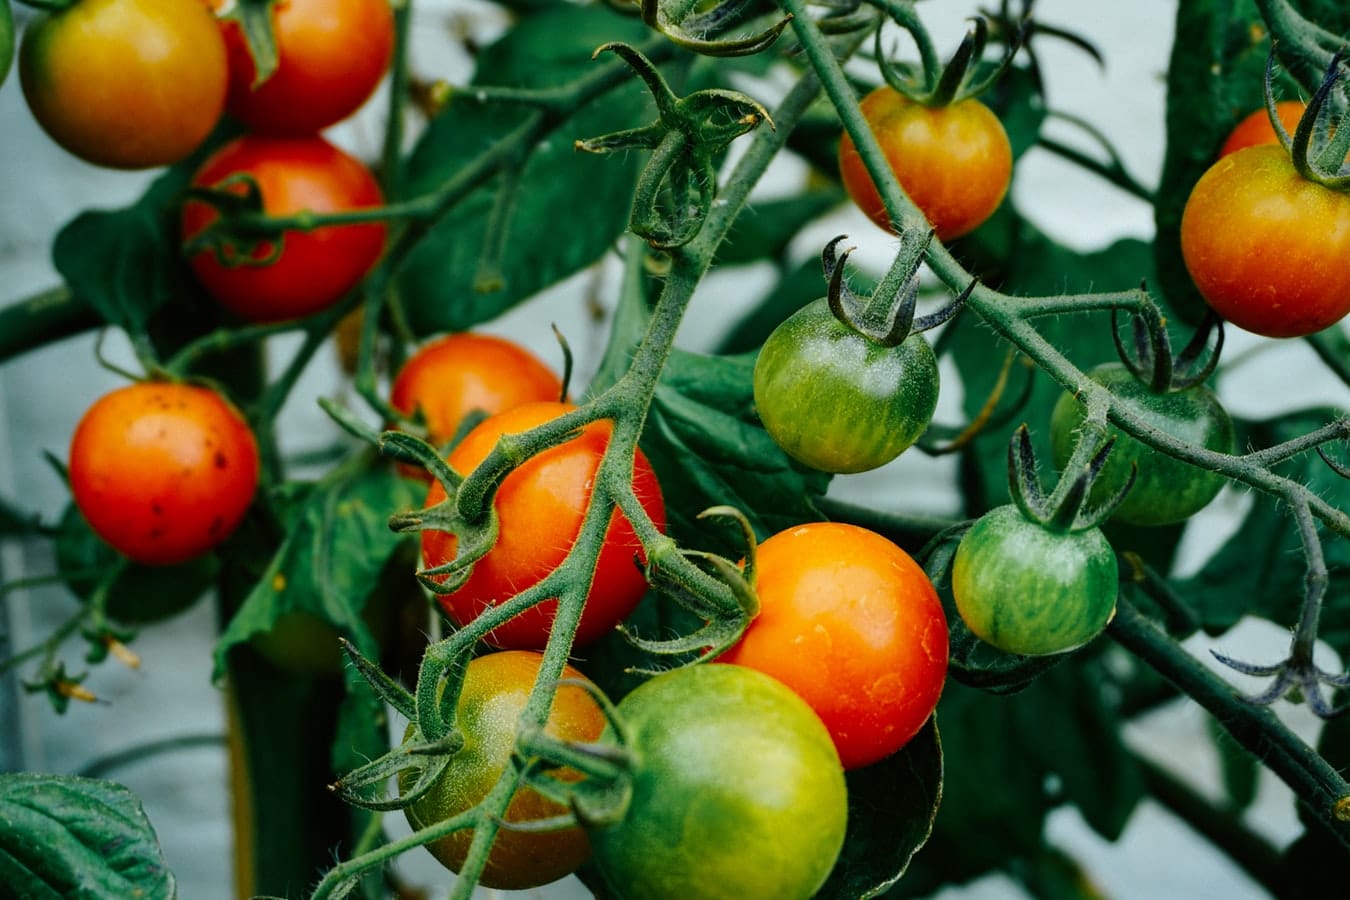 tomatoes on the plant